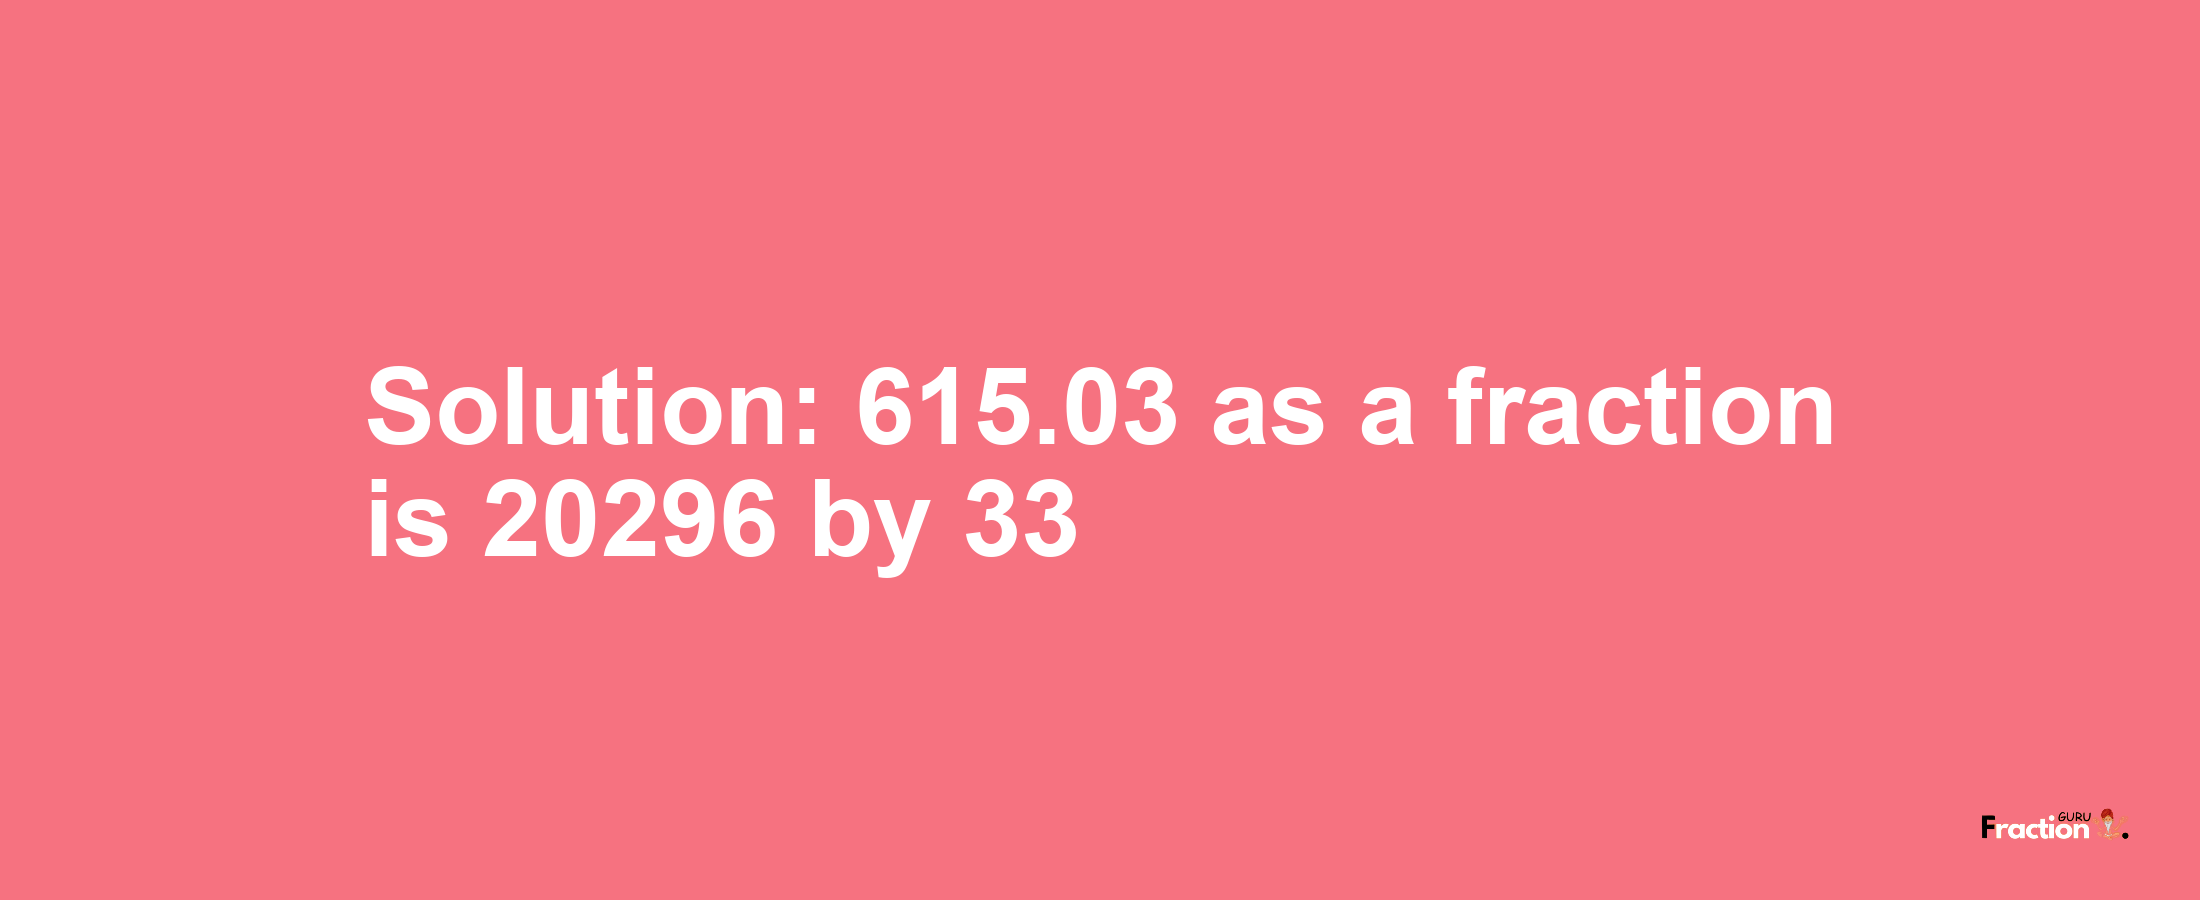 Solution:615.03 as a fraction is 20296/33